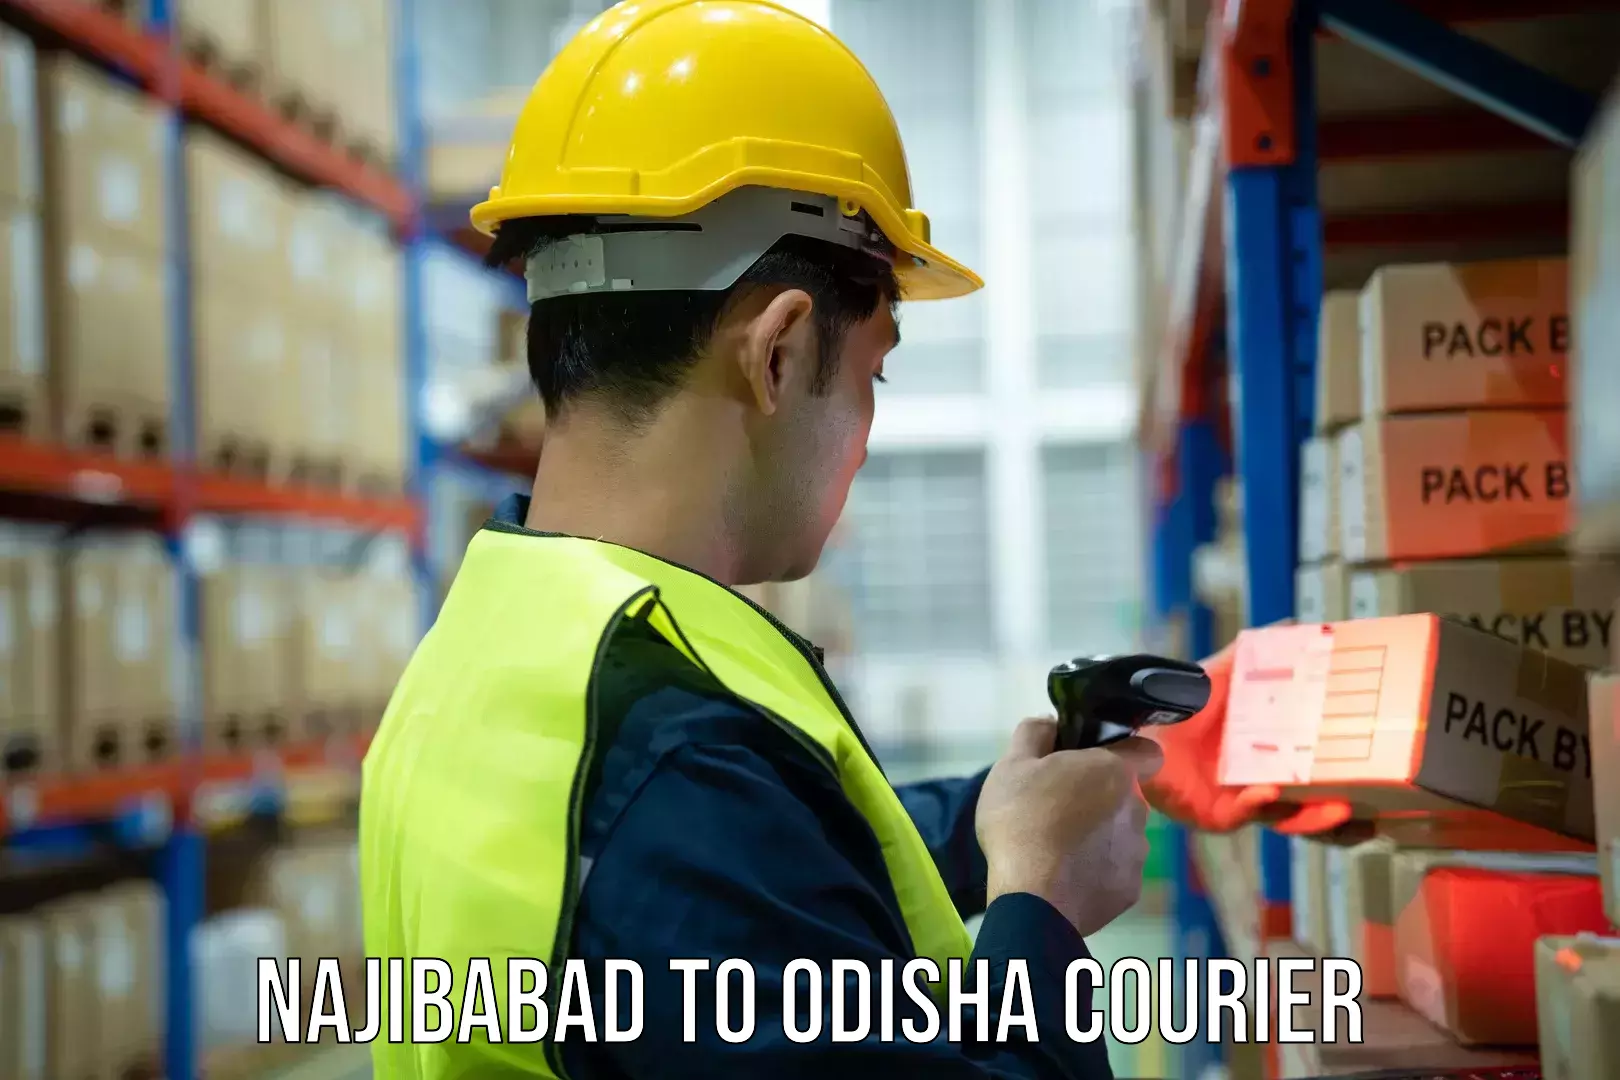 Easy access courier services Najibabad to Dhamara